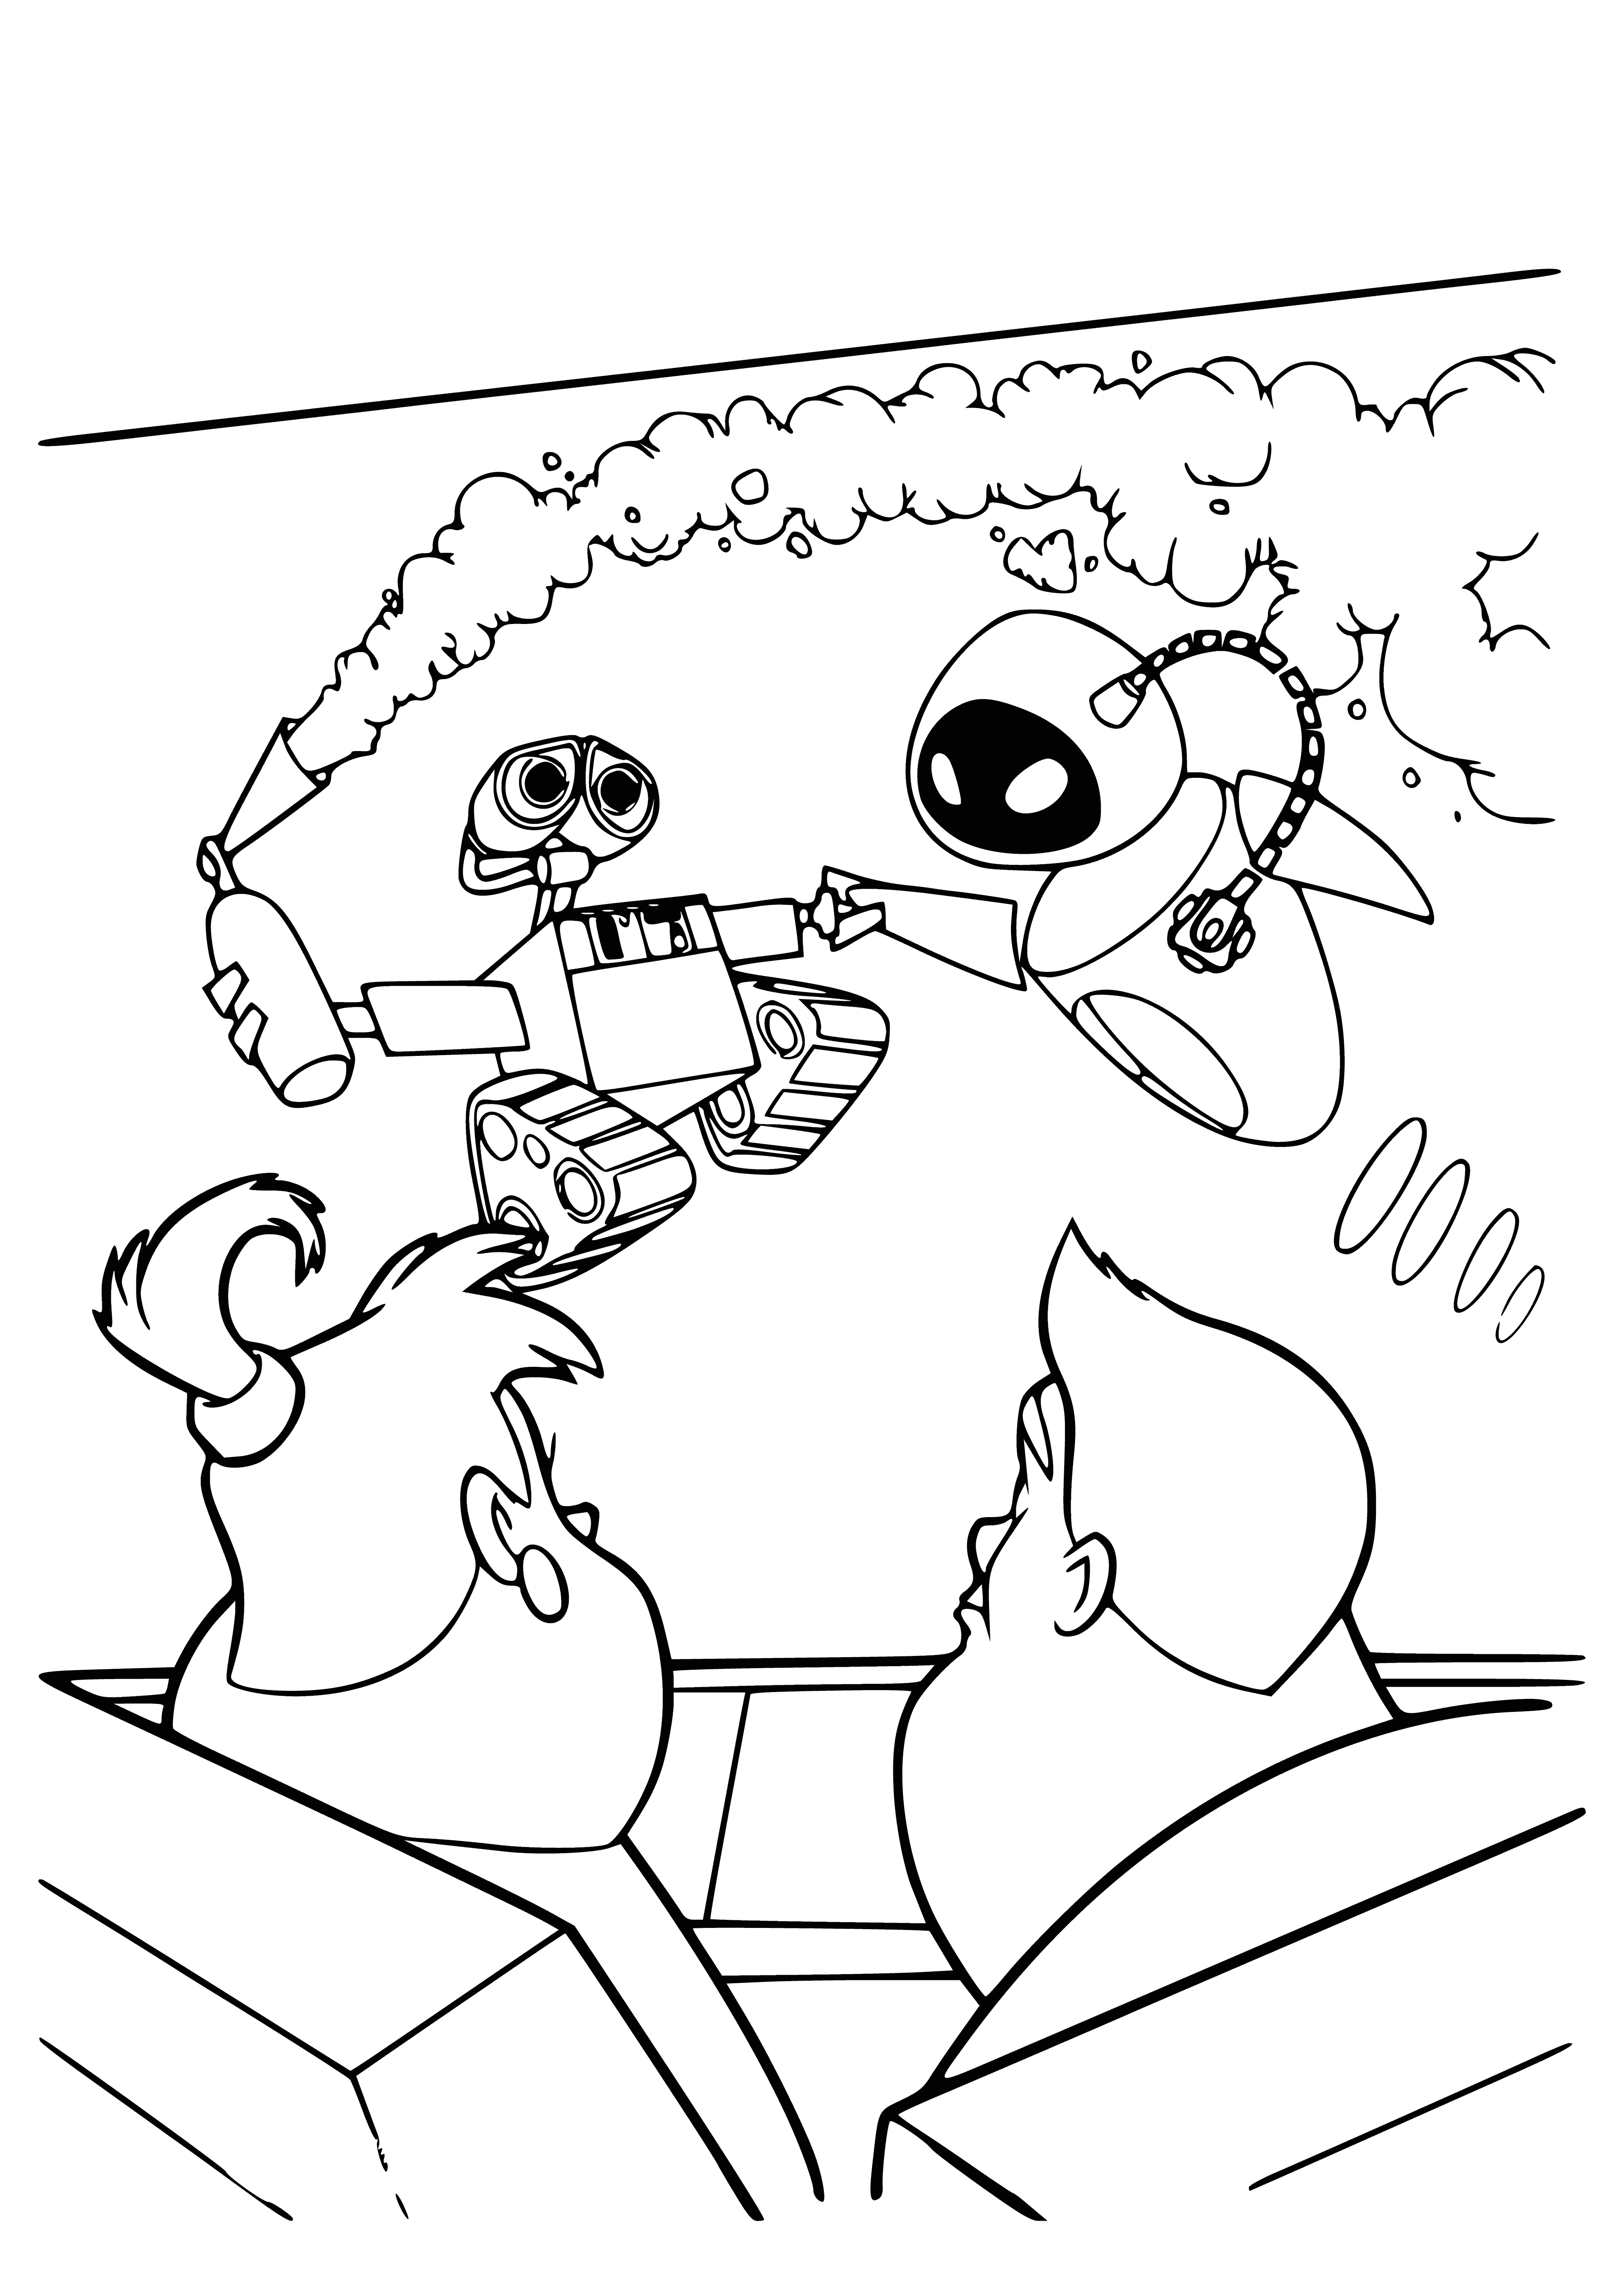 coloring page: Valli and Eve are dancing joyously in a field, spinning & laughing.